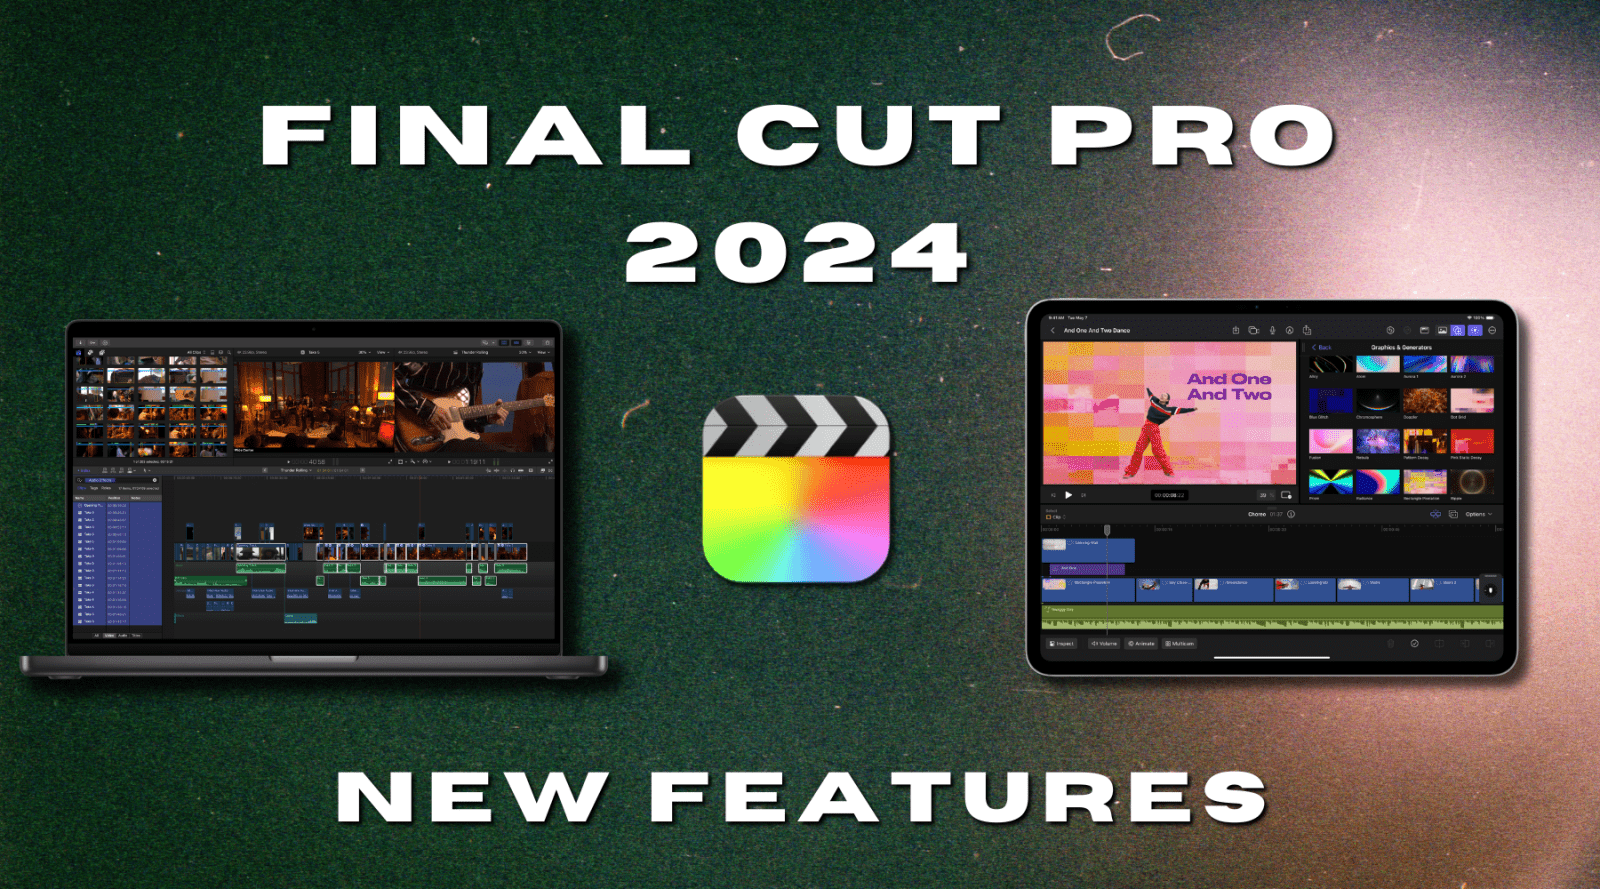 Final Cut Pro for iPad 2 Unleashes Game-Changing New Features - Editors Keys